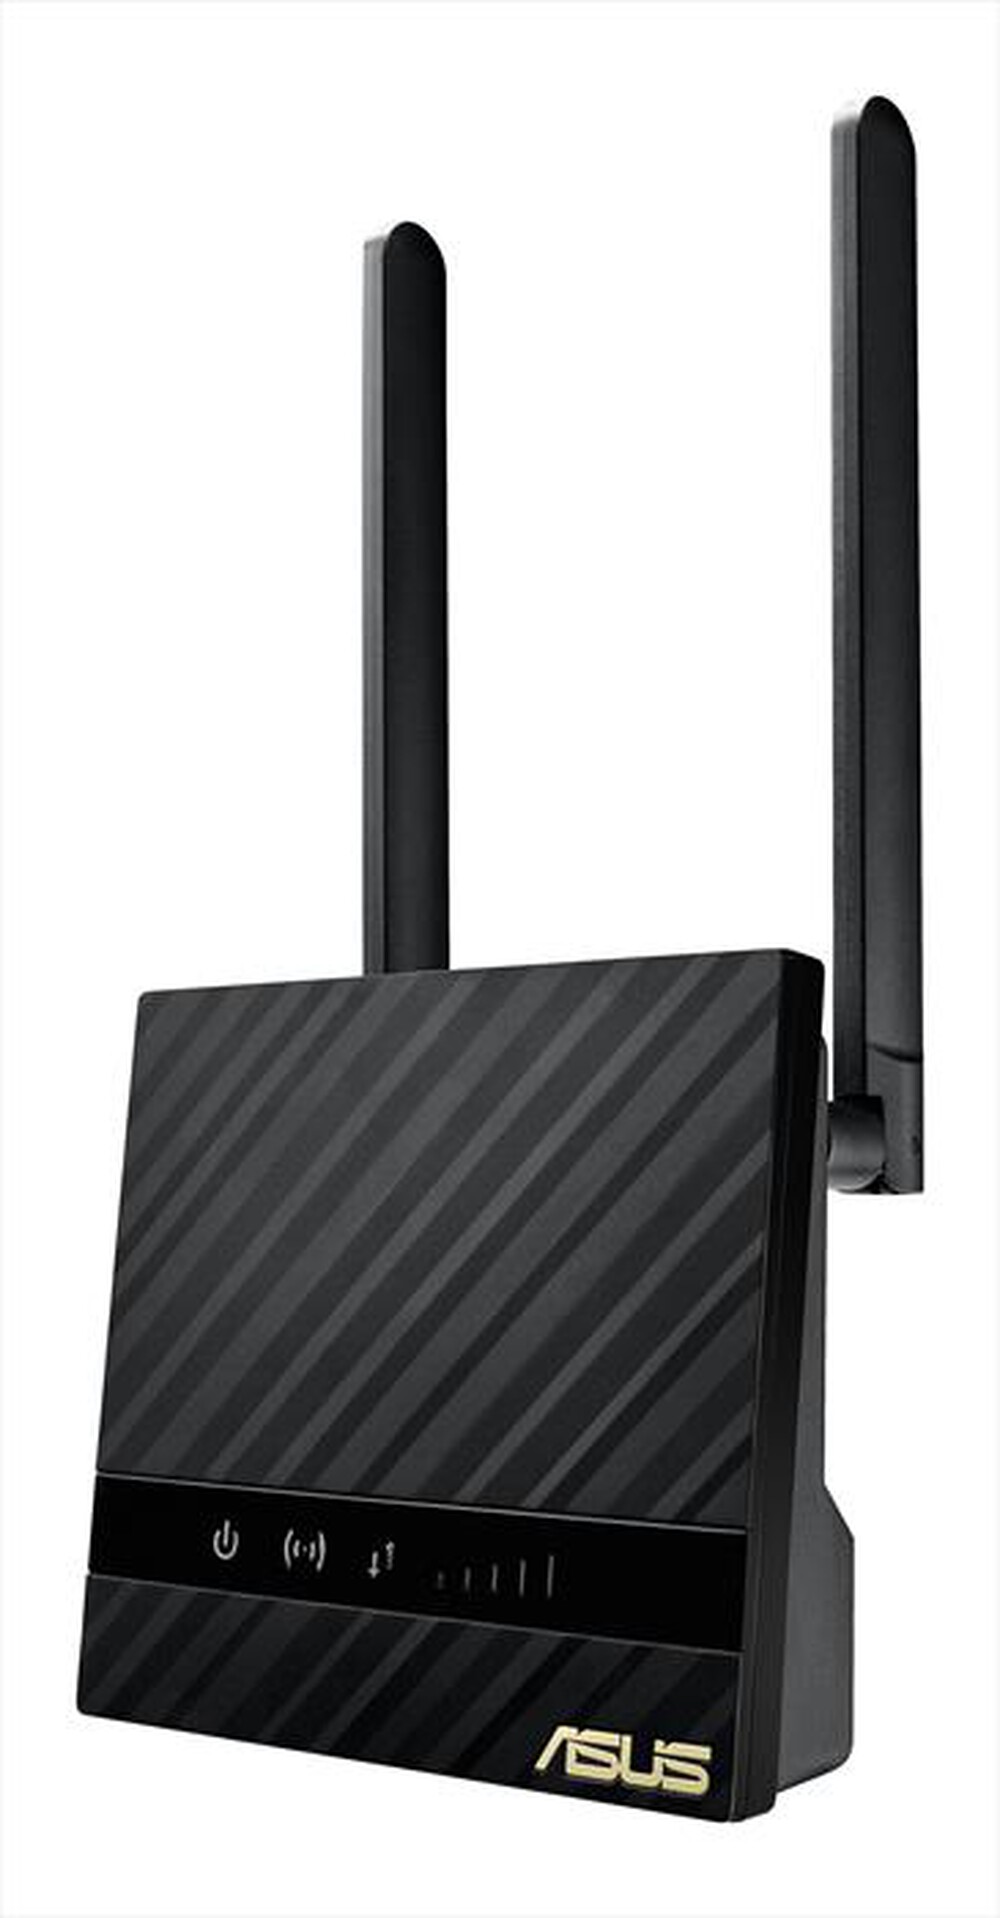 "ASUS - Modem-Router 4G-N16-Nero"